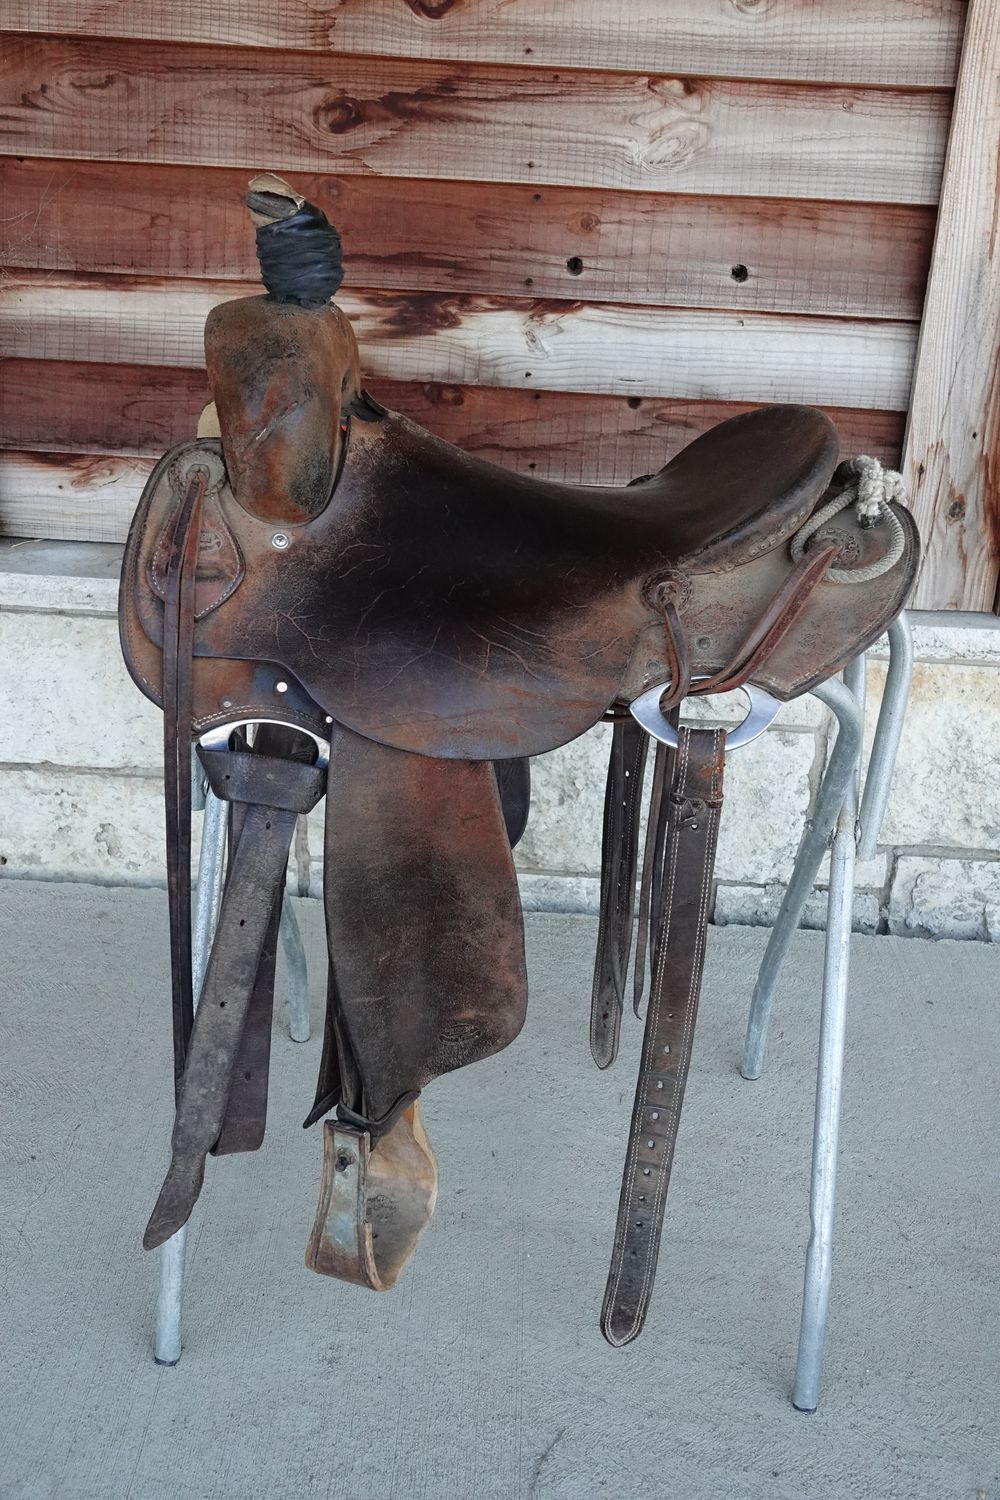 17" Cowpuncher ranch saddle - $2,000